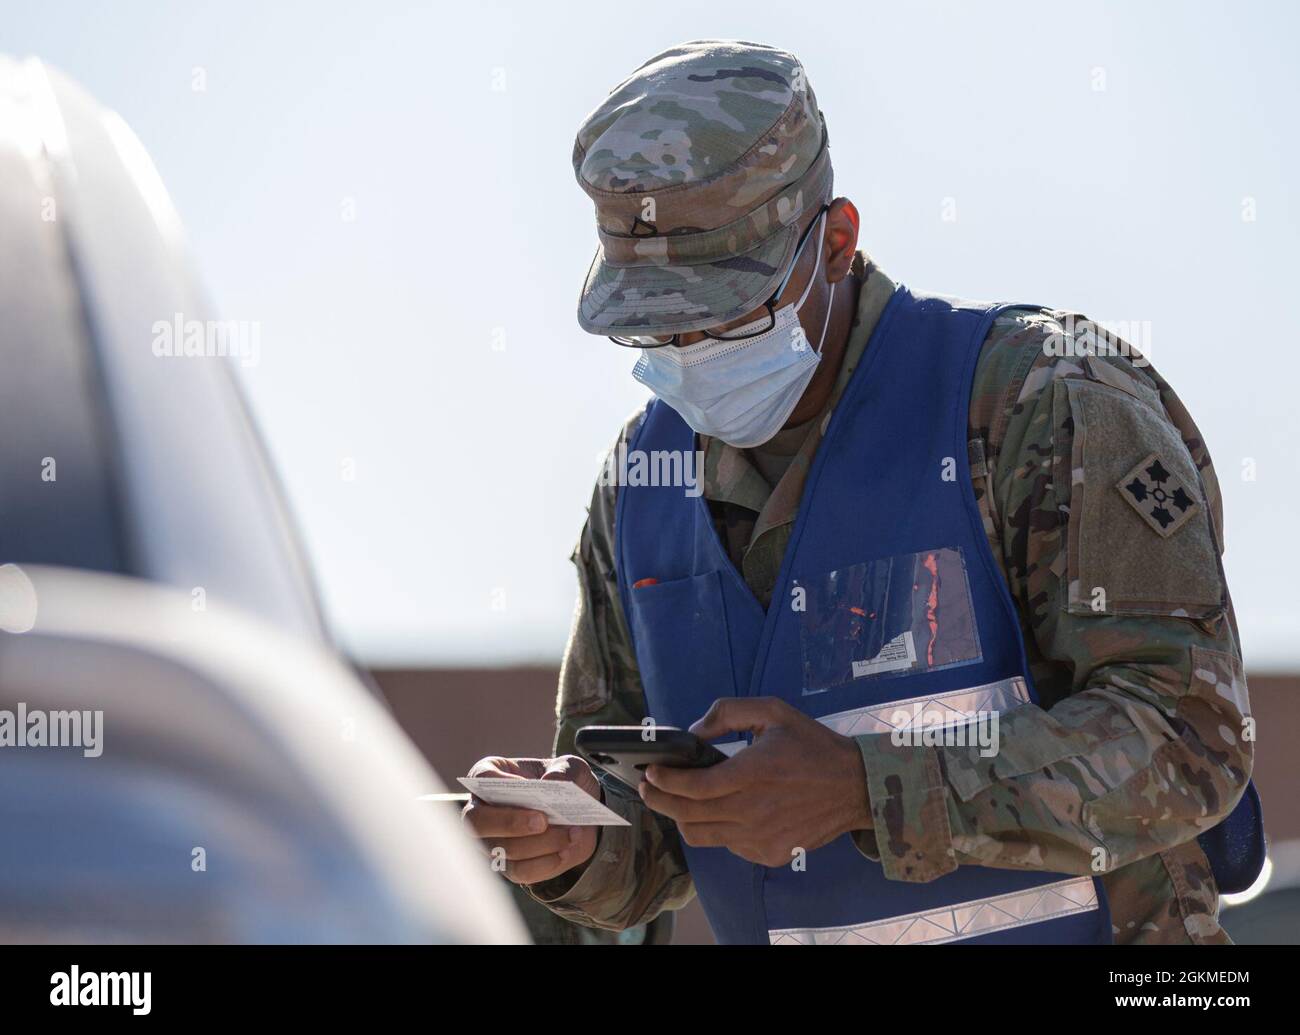 U.S. Army Pfc. Nardo Martinez, a combat medic assigned to 2nd Stryker Brigade Combat Team, 4th Infantry Division, verifies a community member’s information in Pueblo, Colorado, May 27, 2021. The Soldiers continue to vaccinate members of the Pueblo community and surrounding areas as part of the federal vaccination response mission. U.S. Northern Command, through U.S. Army North, remains committed to providing continued, flexible Department of Defense support to the Federal Emergency Management Agency as part of the whole-of-government response to COVID-19. Stock Photo